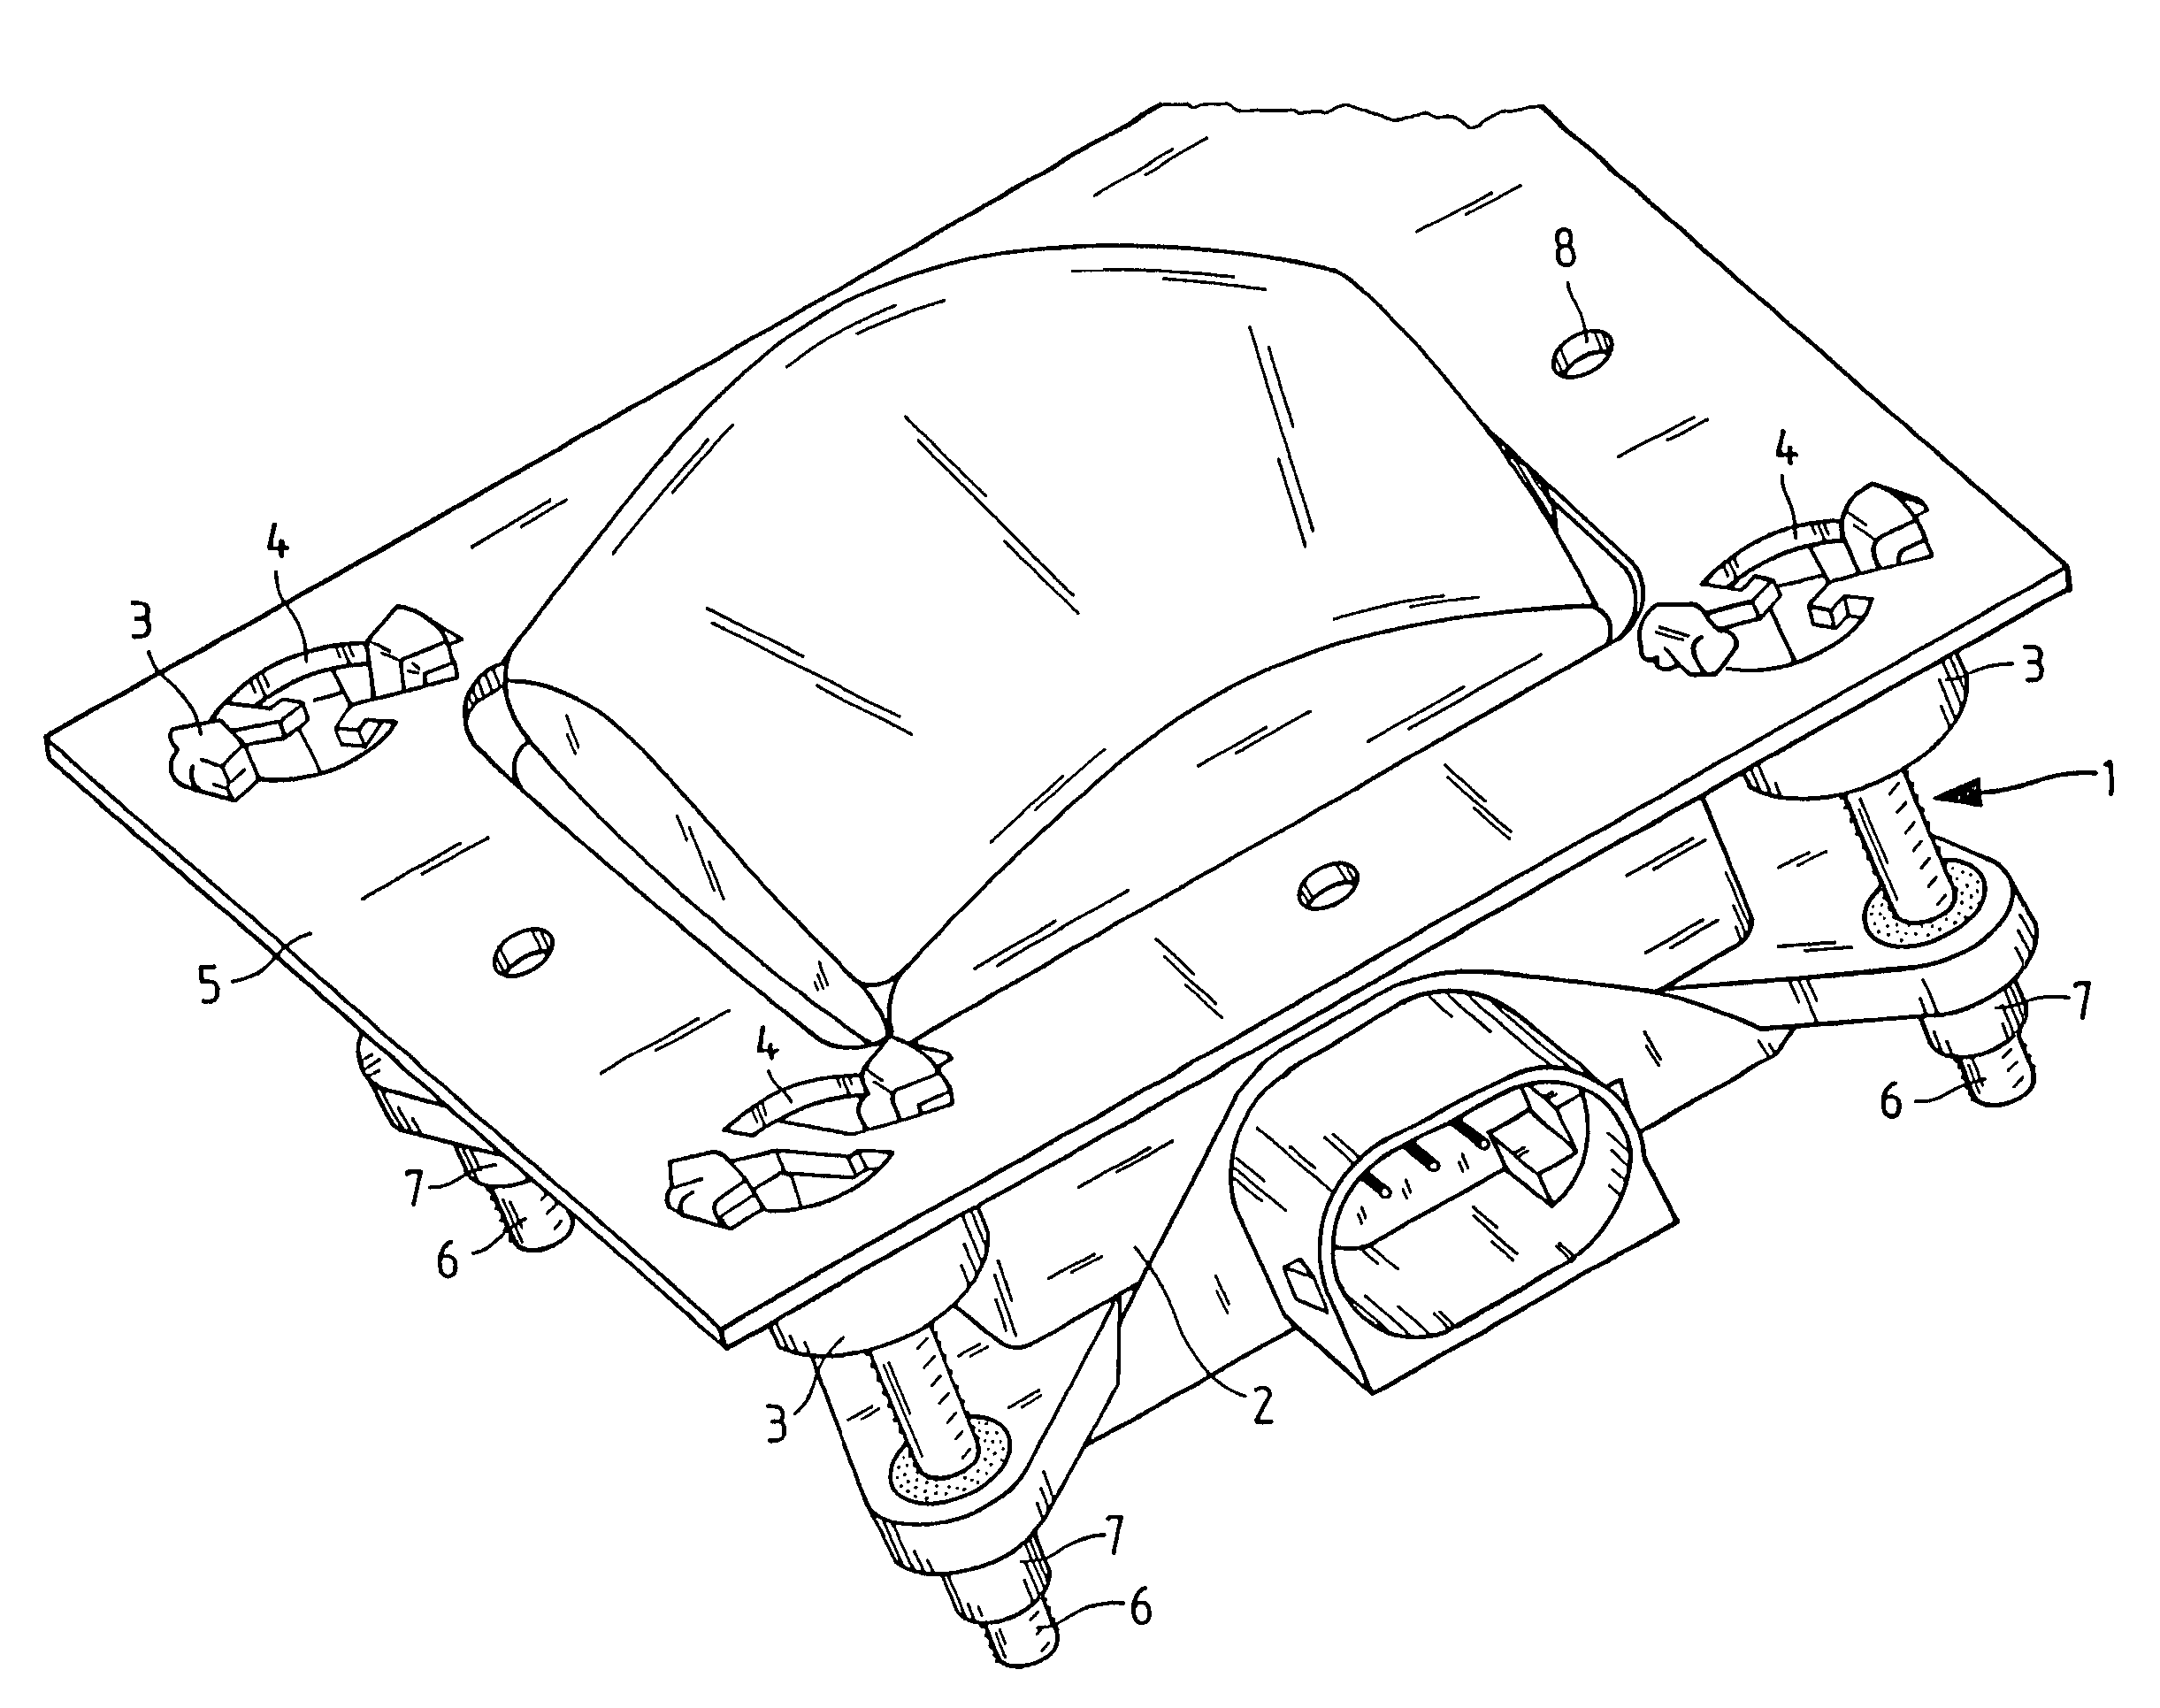 Positioning device for adjustable housing